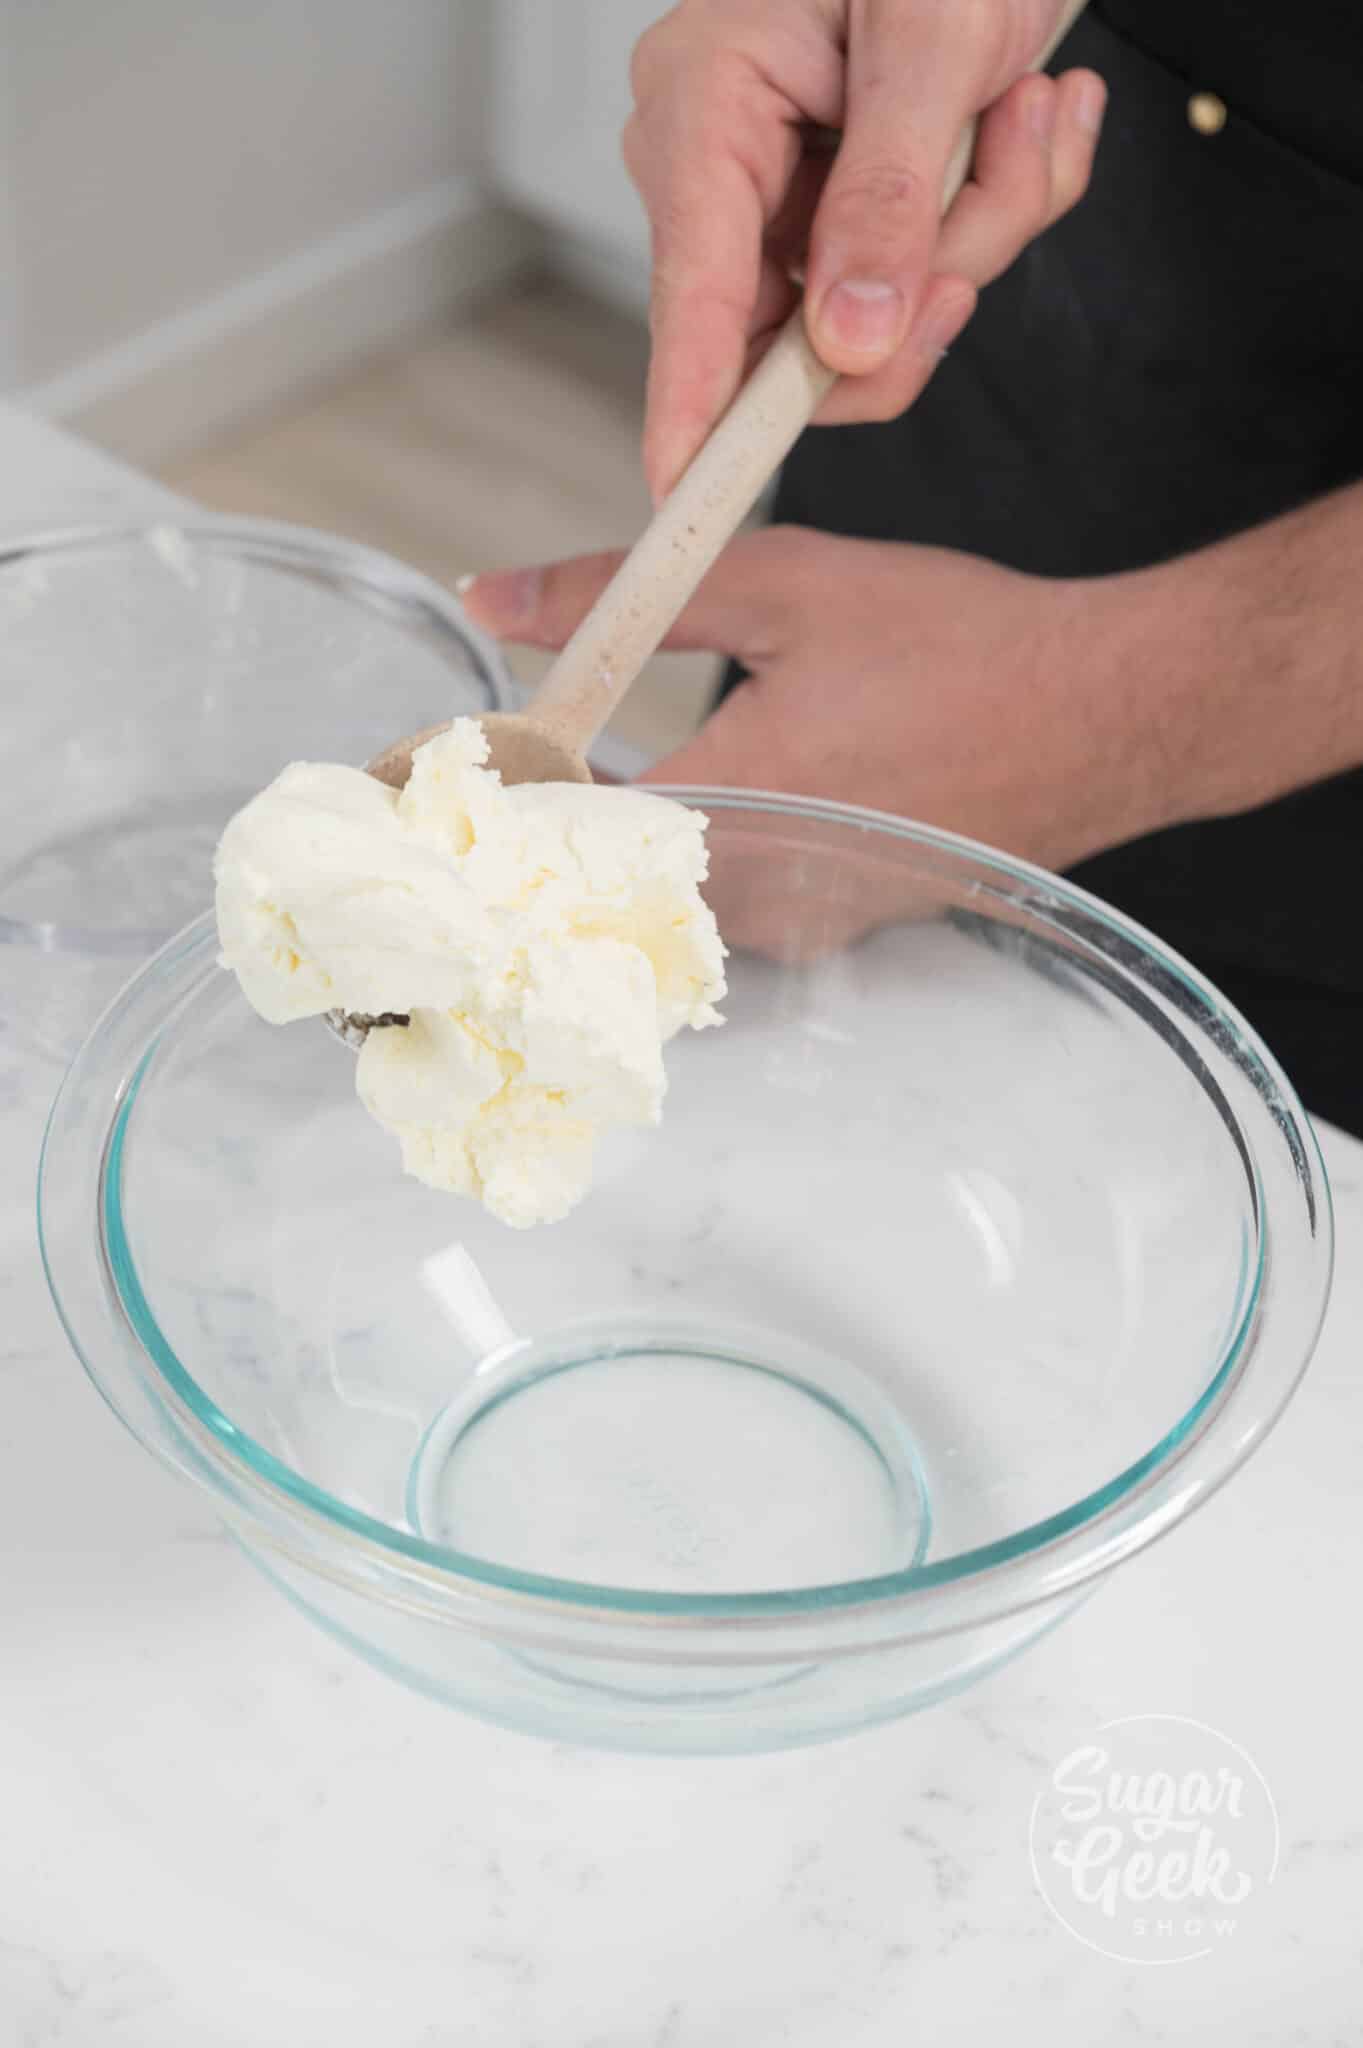 hand using spoon to spoon cream cheese into bowl.